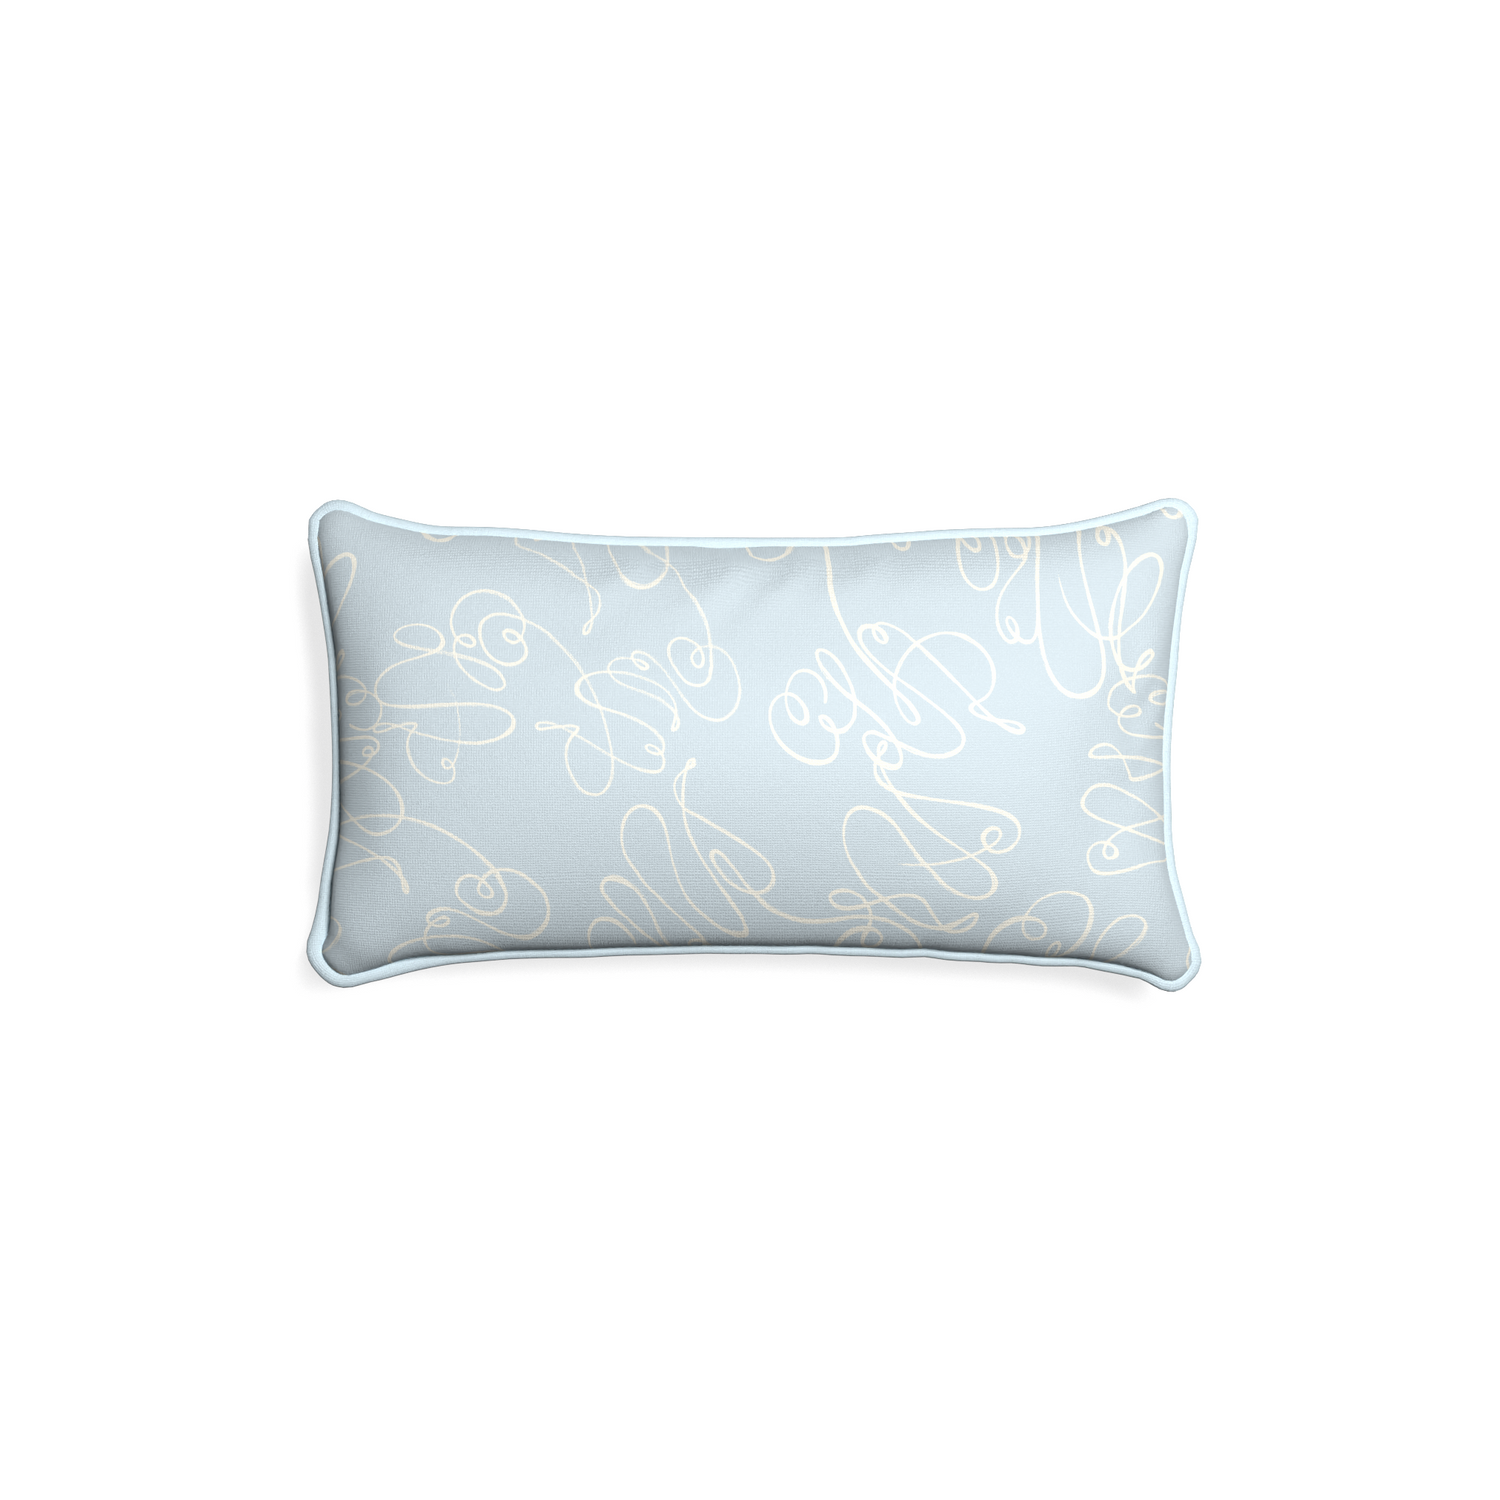 Petite-lumbar mirabella custom powder blue abstractpillow with powder piping on white background